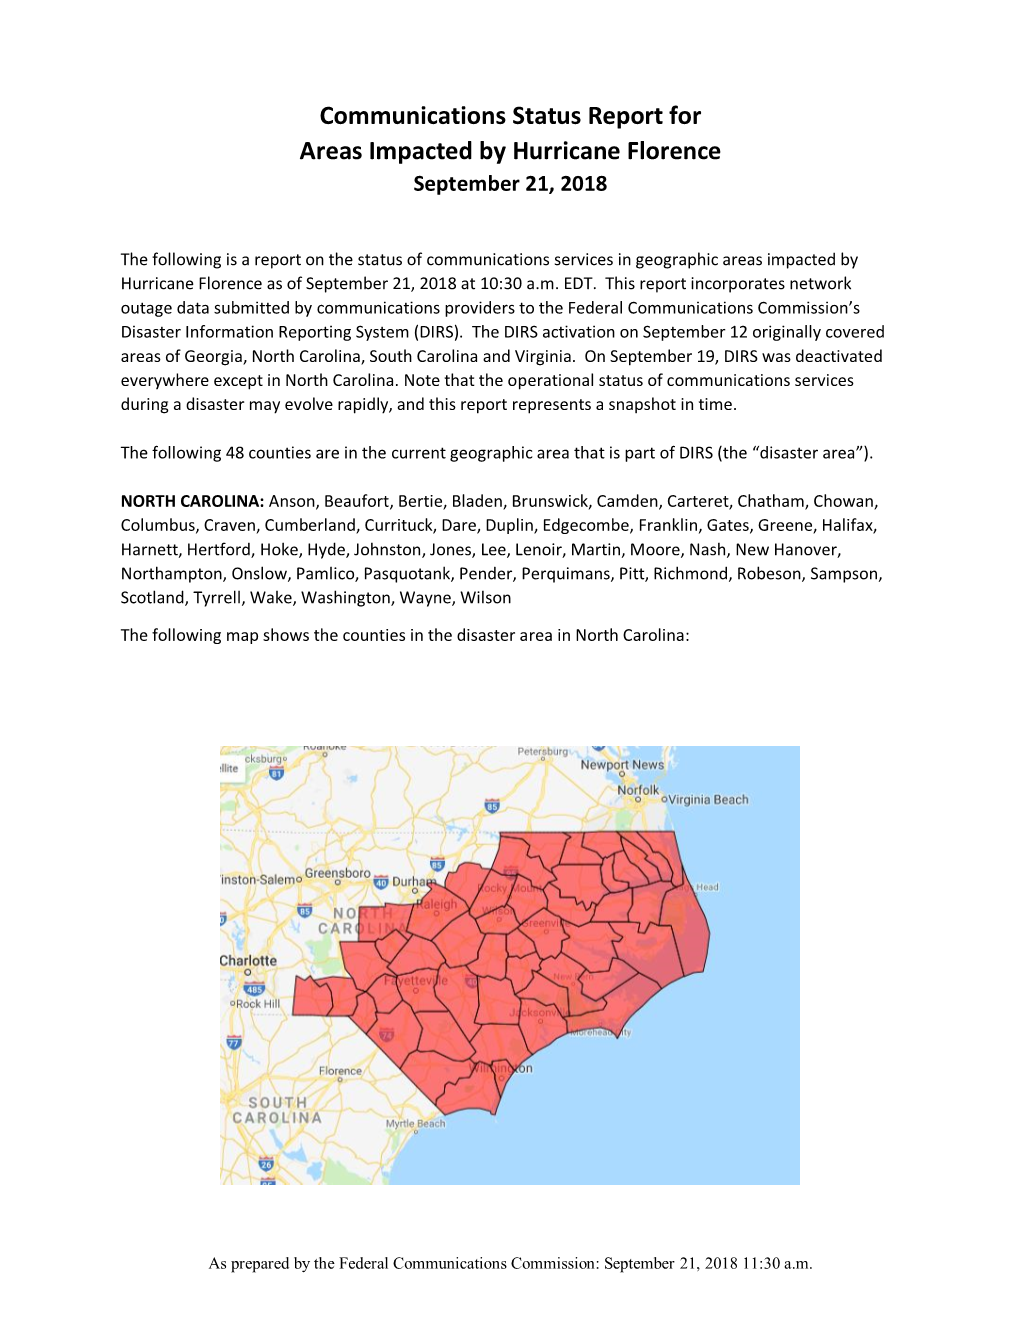 Communications Status Report for Areas Impacted by Hurricane Florence September 21, 2018